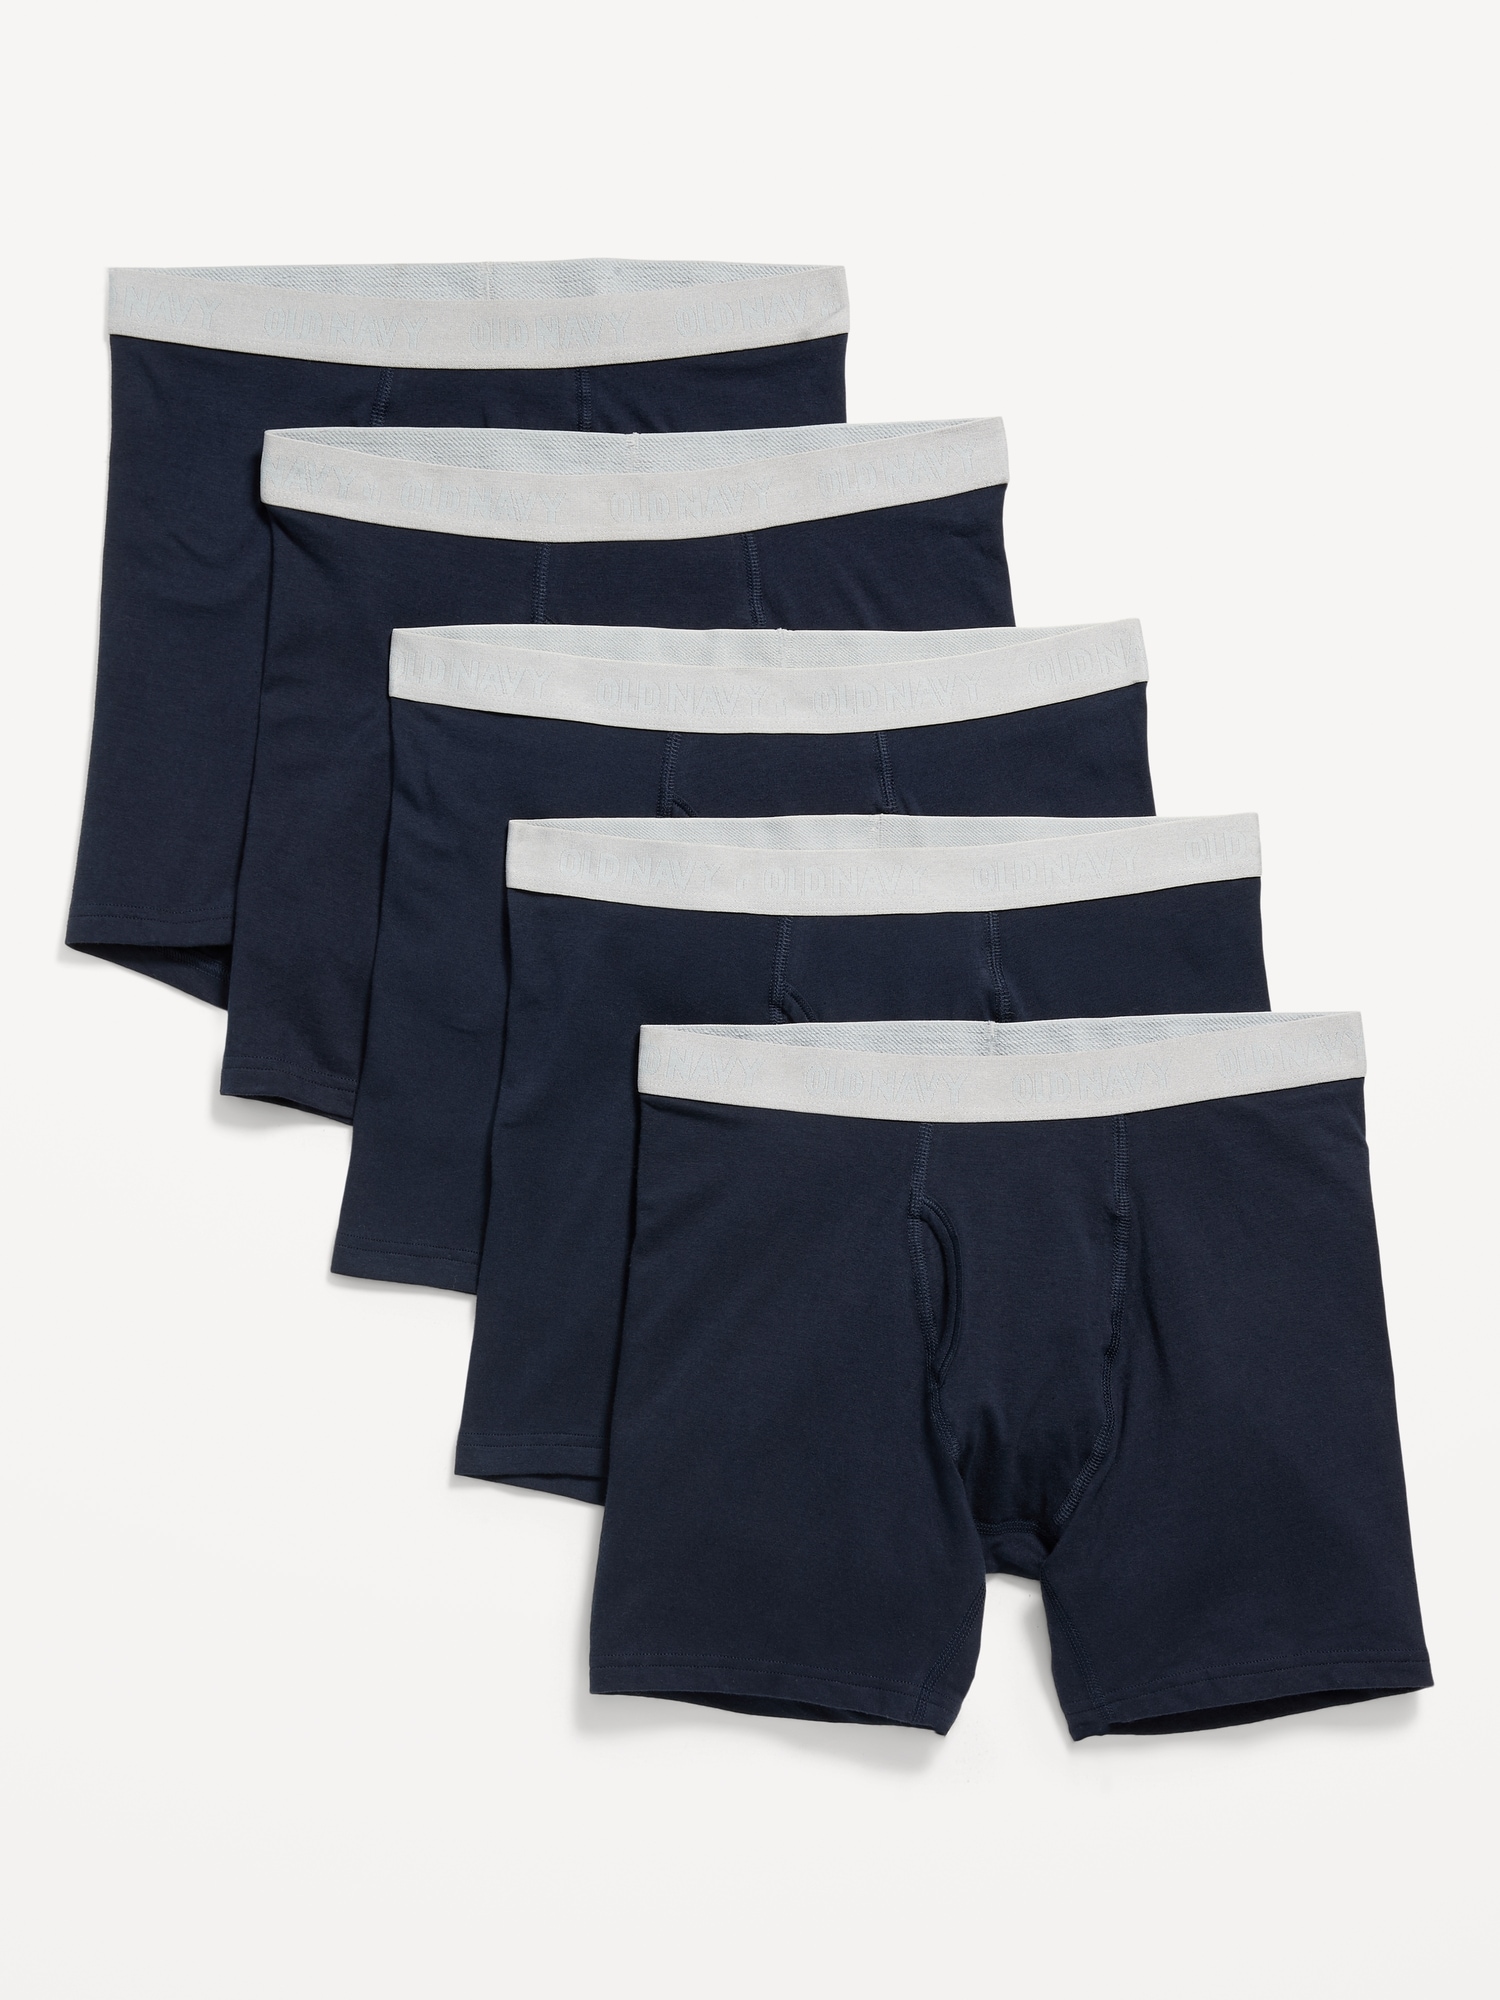 Underwear For Big And Tall Men